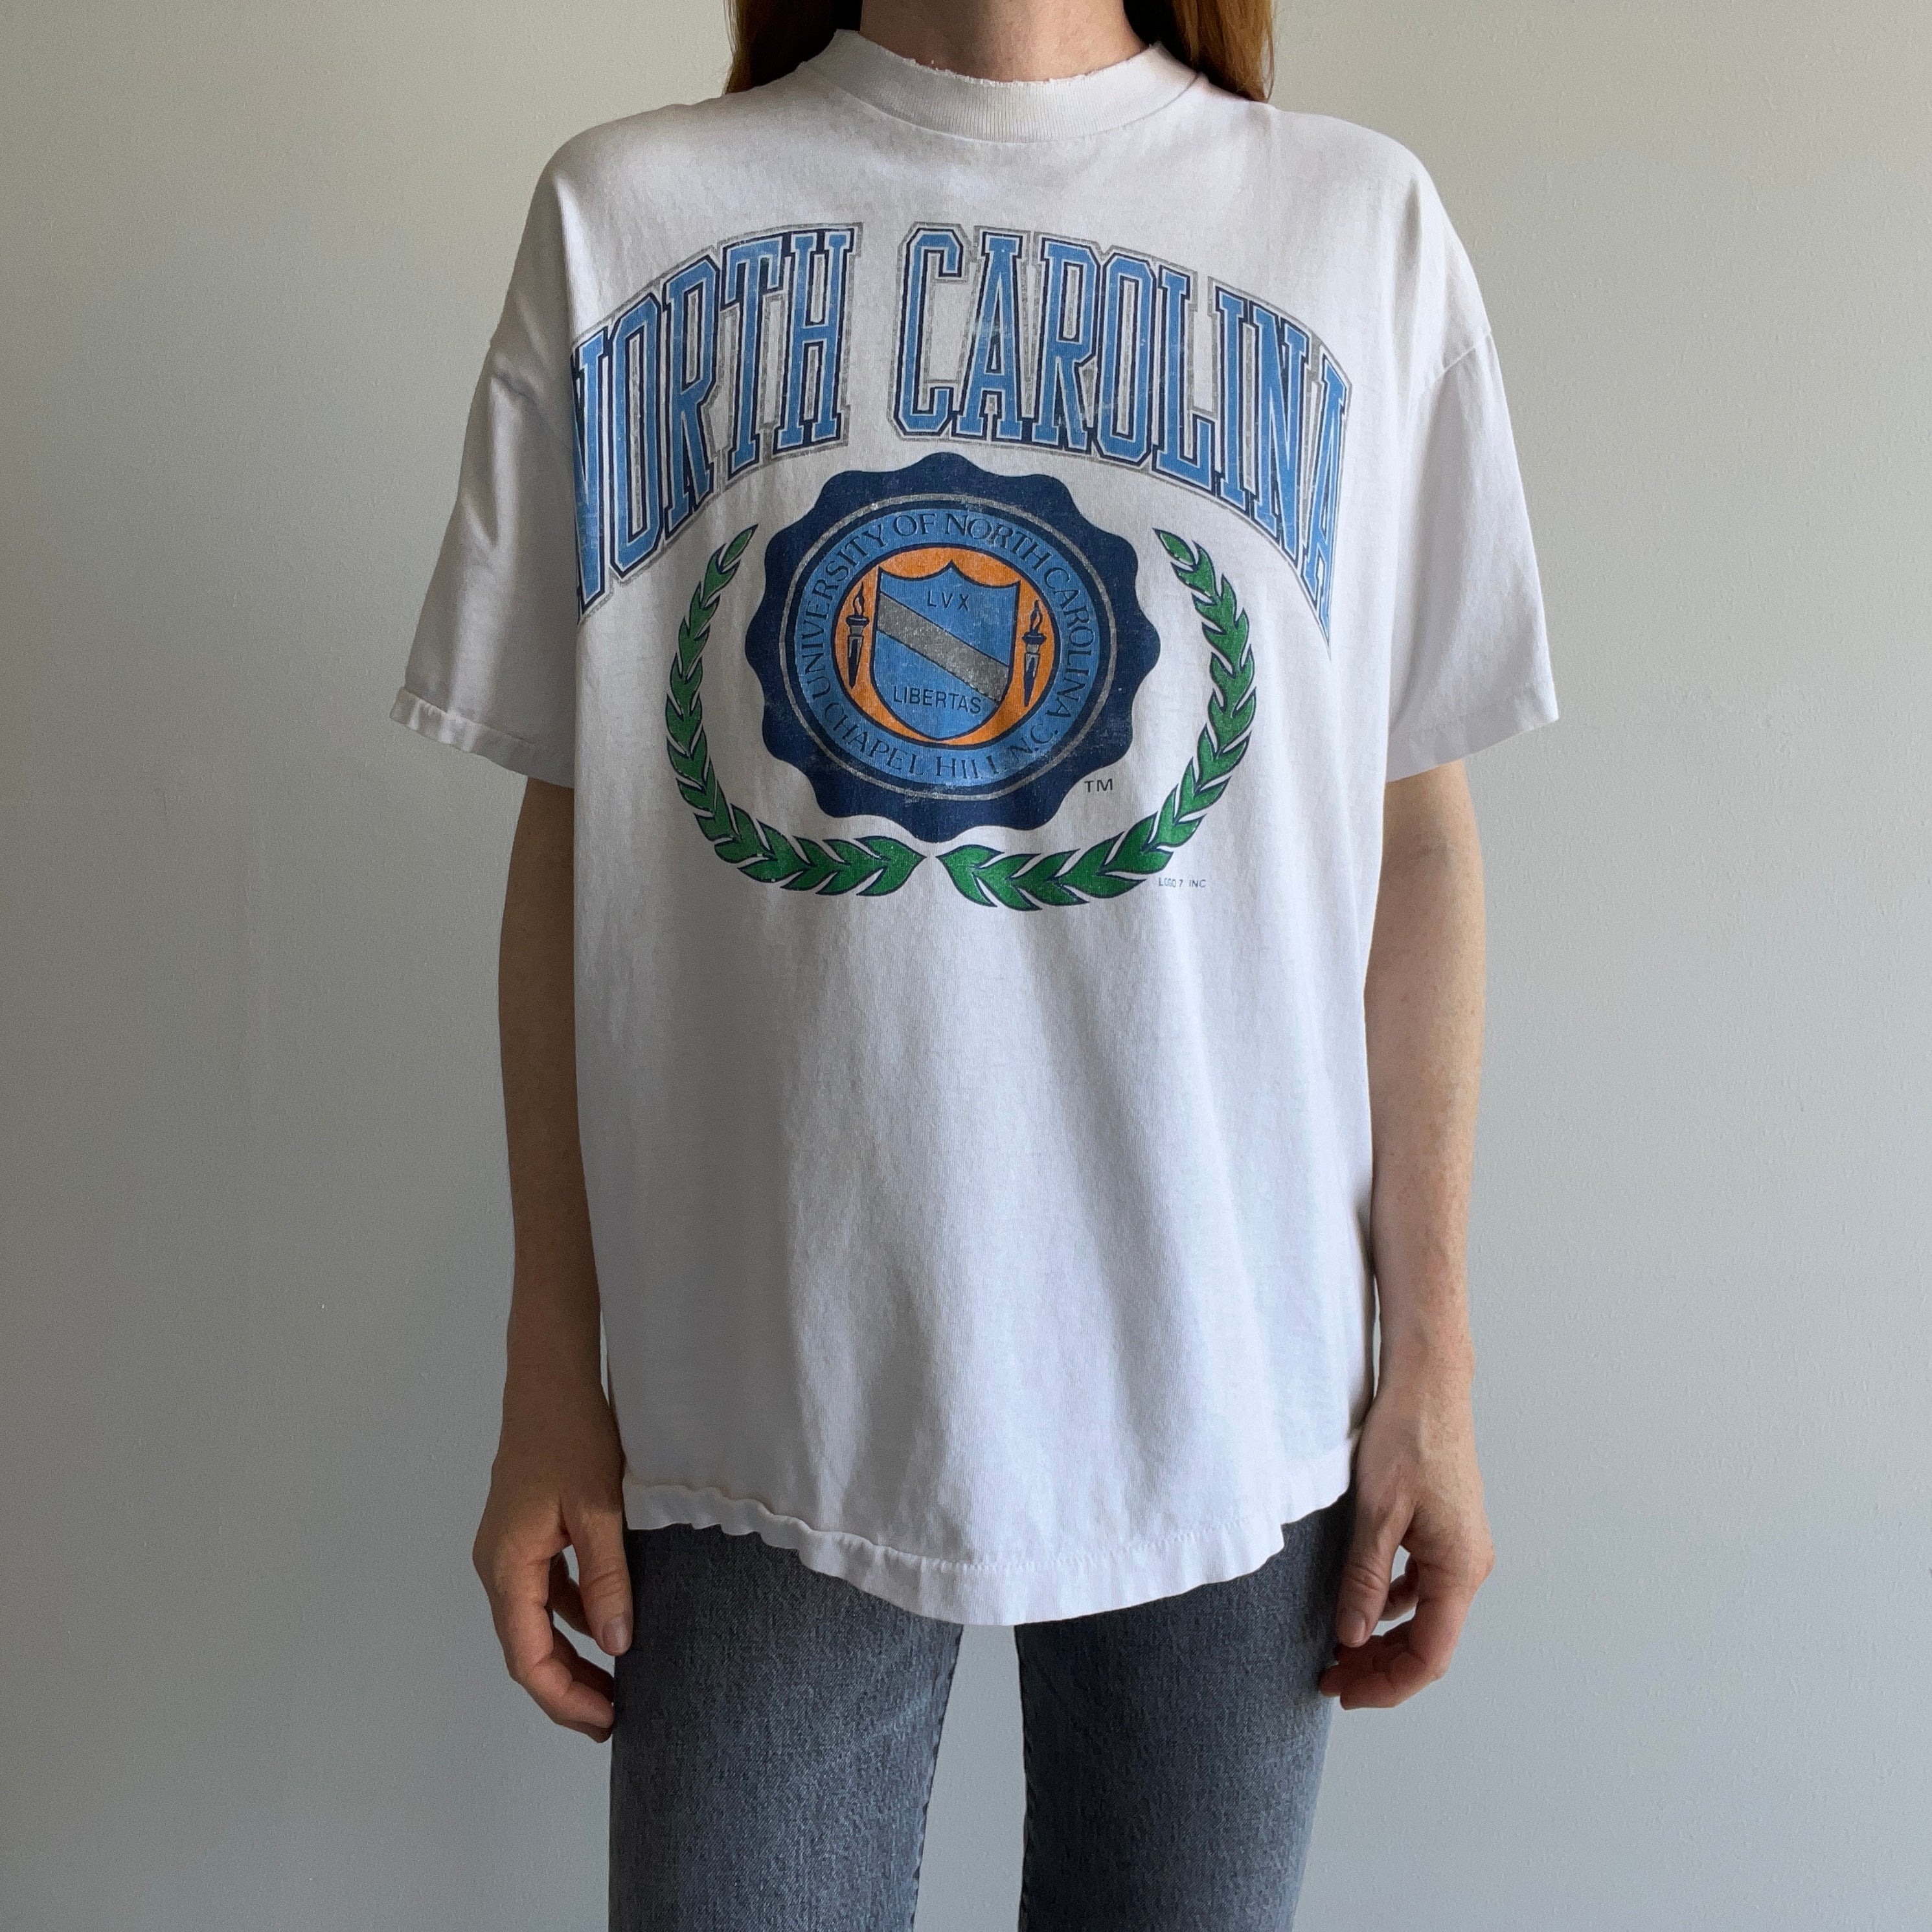 1980/90s Tattered, Torn, Worn, Washed with Dark Colors, North Carolina T-Shirt